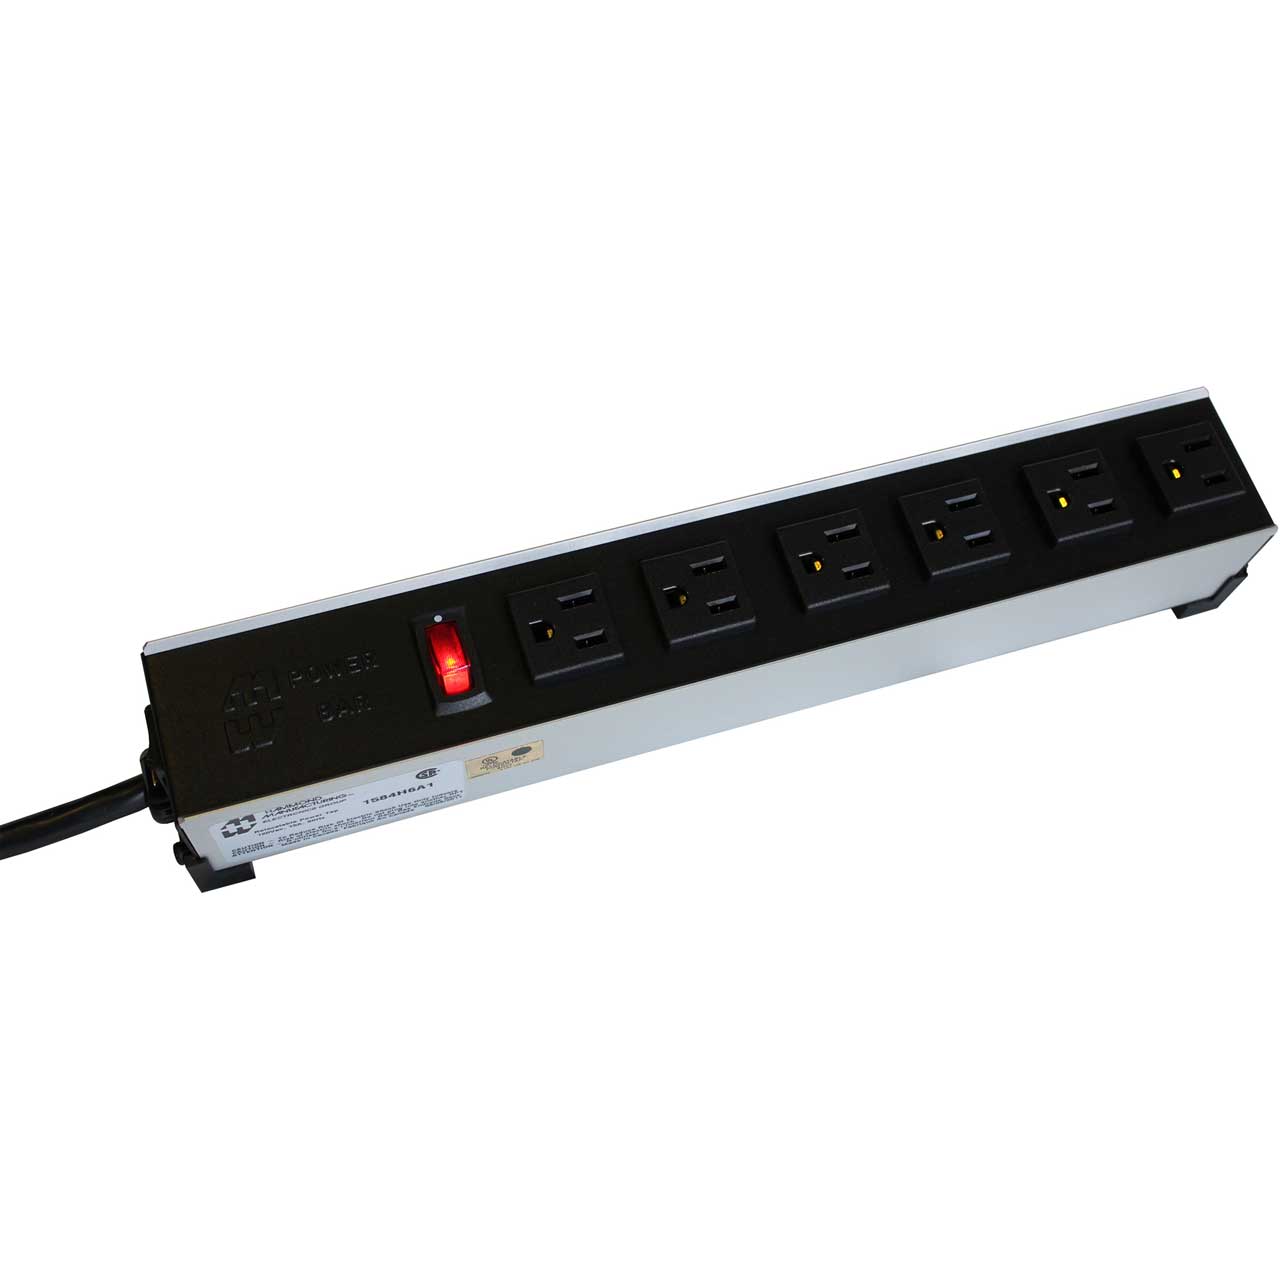 Hammond 1584T4A1 15A H.D. - 4 Outlet Strip - 6 Foot Cord - Outlets Front - Black - No Switch - Indicator Light Only HMND-1584T4A1